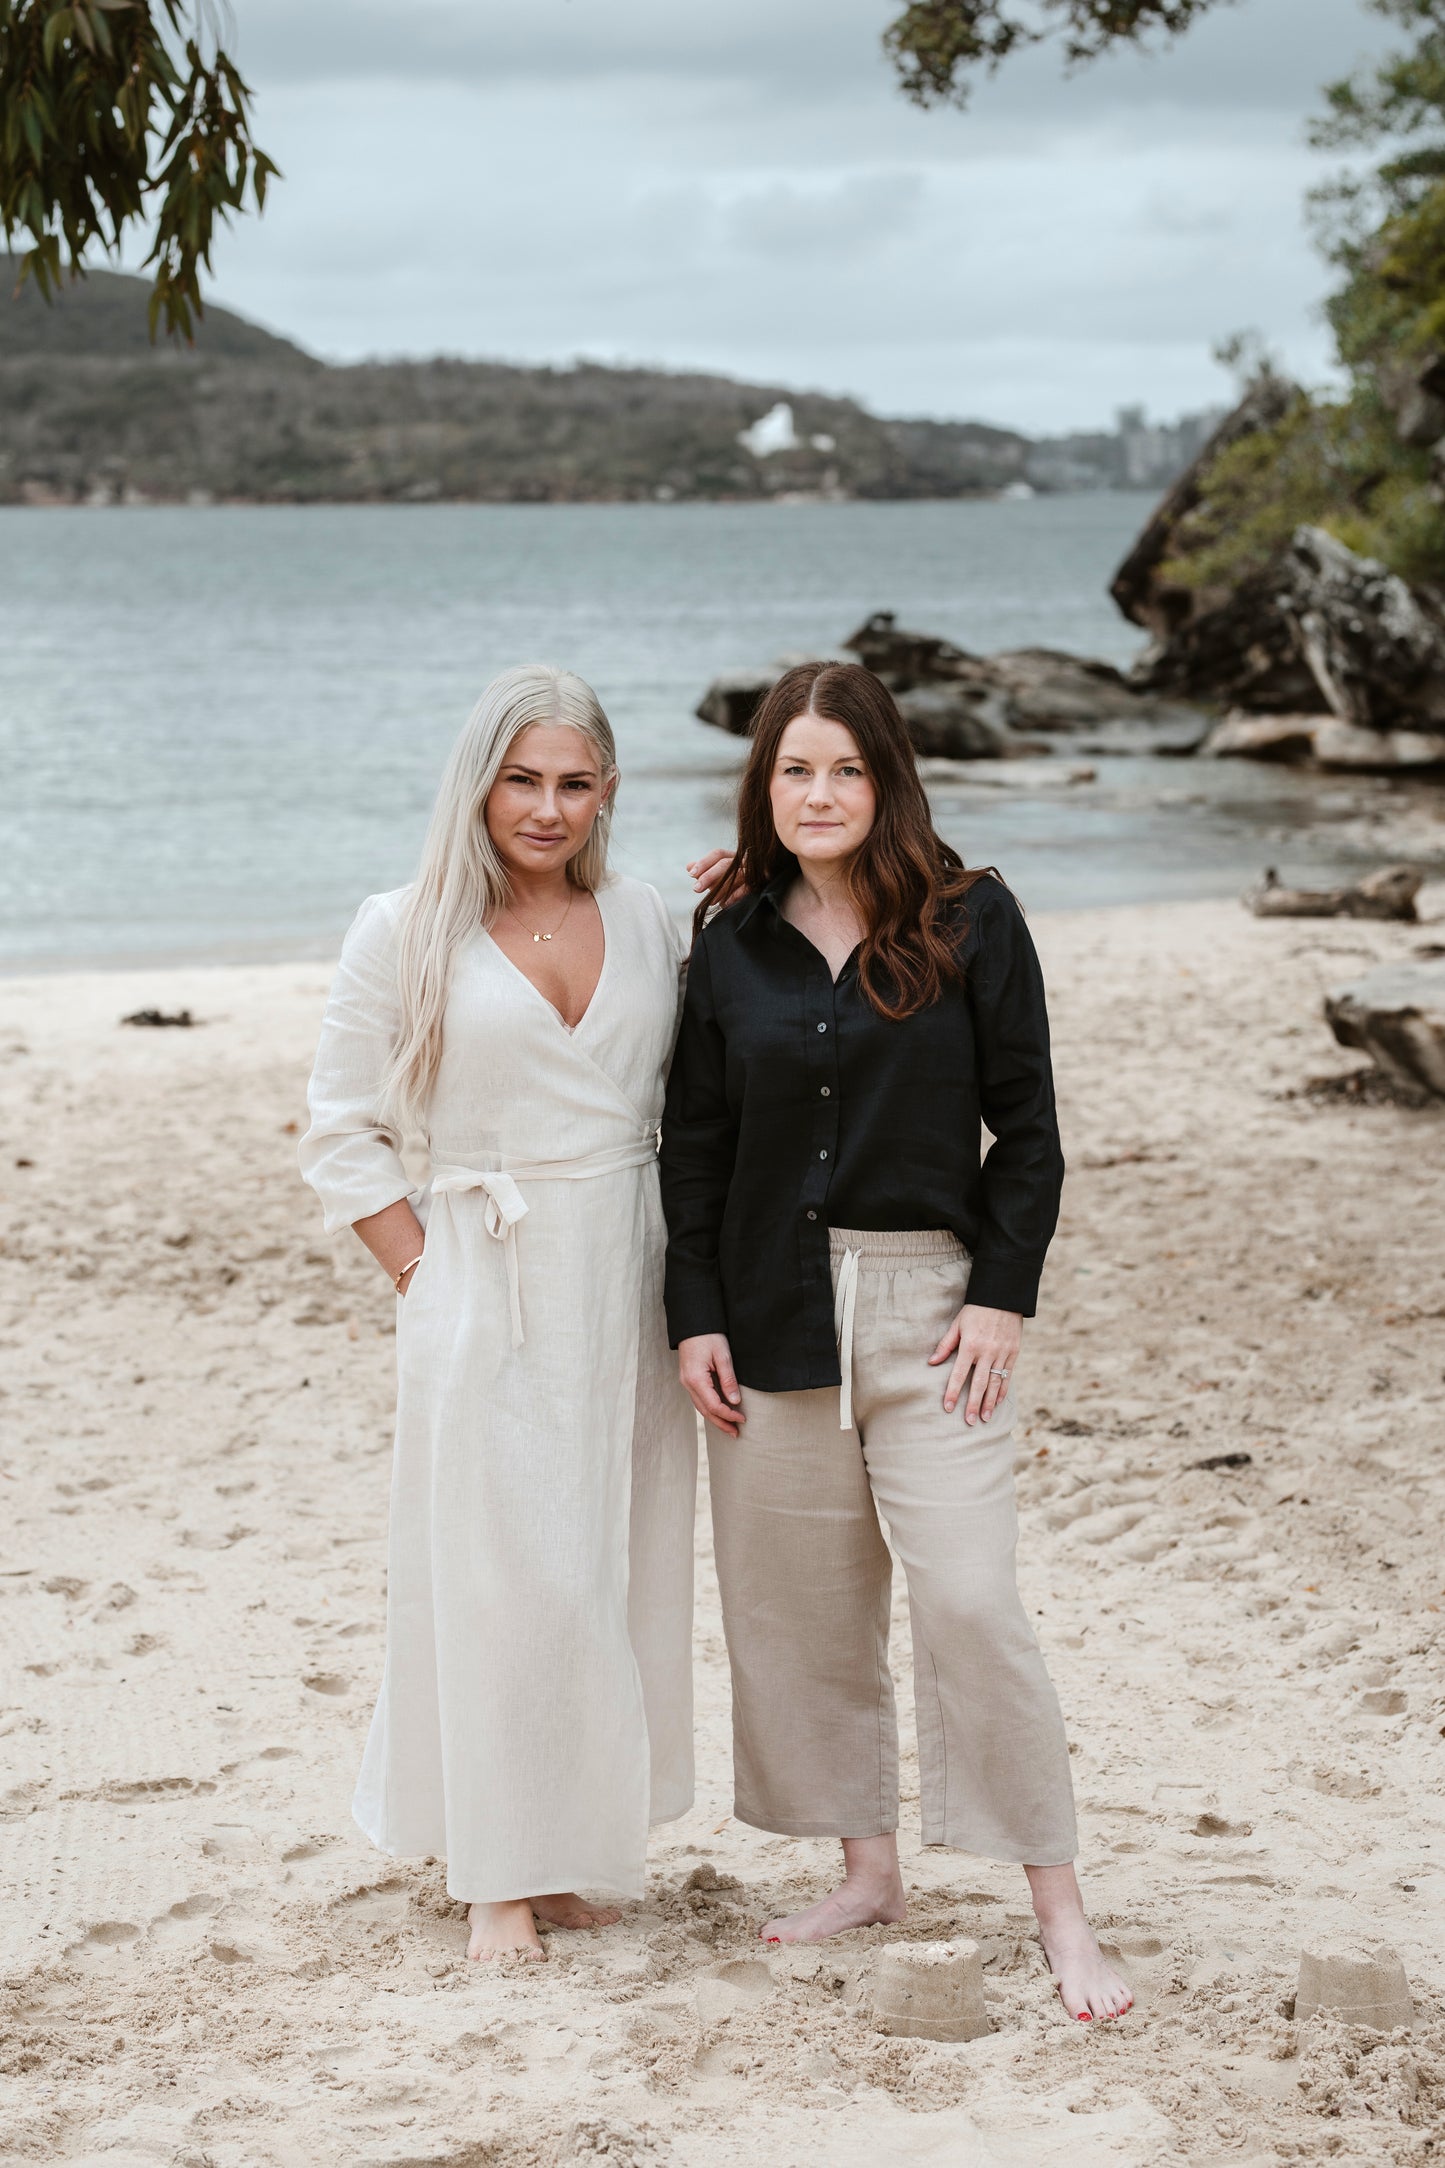 Two petite women on a beach. One wearing an off white linen wrap dress and the other in a navy linen shirt and beige linen pants.